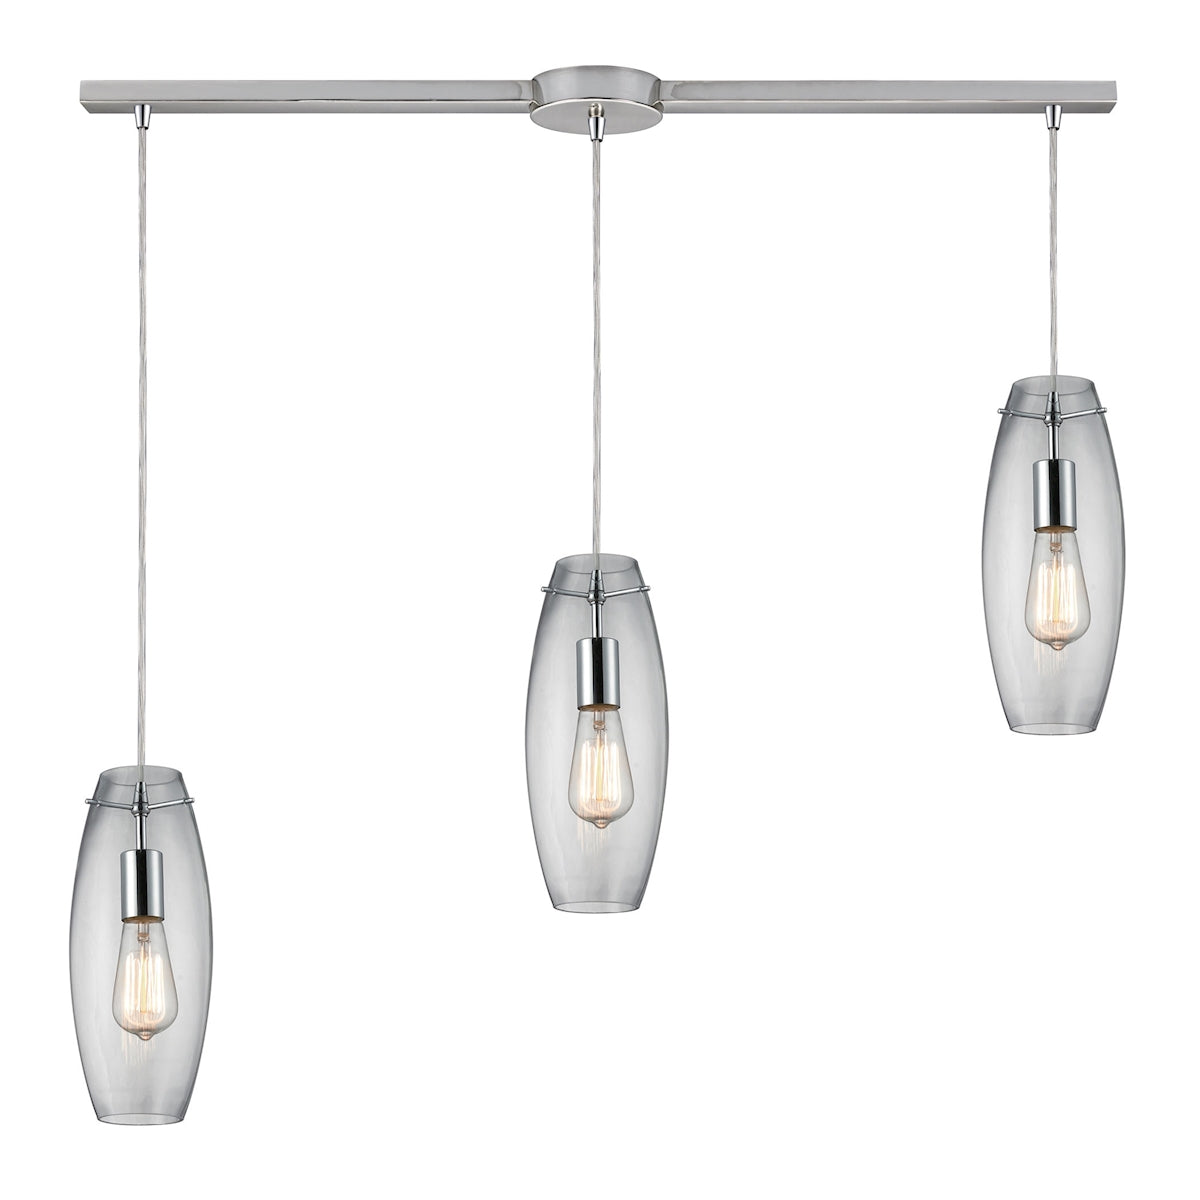 ELK Lighting 60054-3L - Menlow Park 5" Wide 3-Light Linear Pendant Fixture in Polished Chrome with S